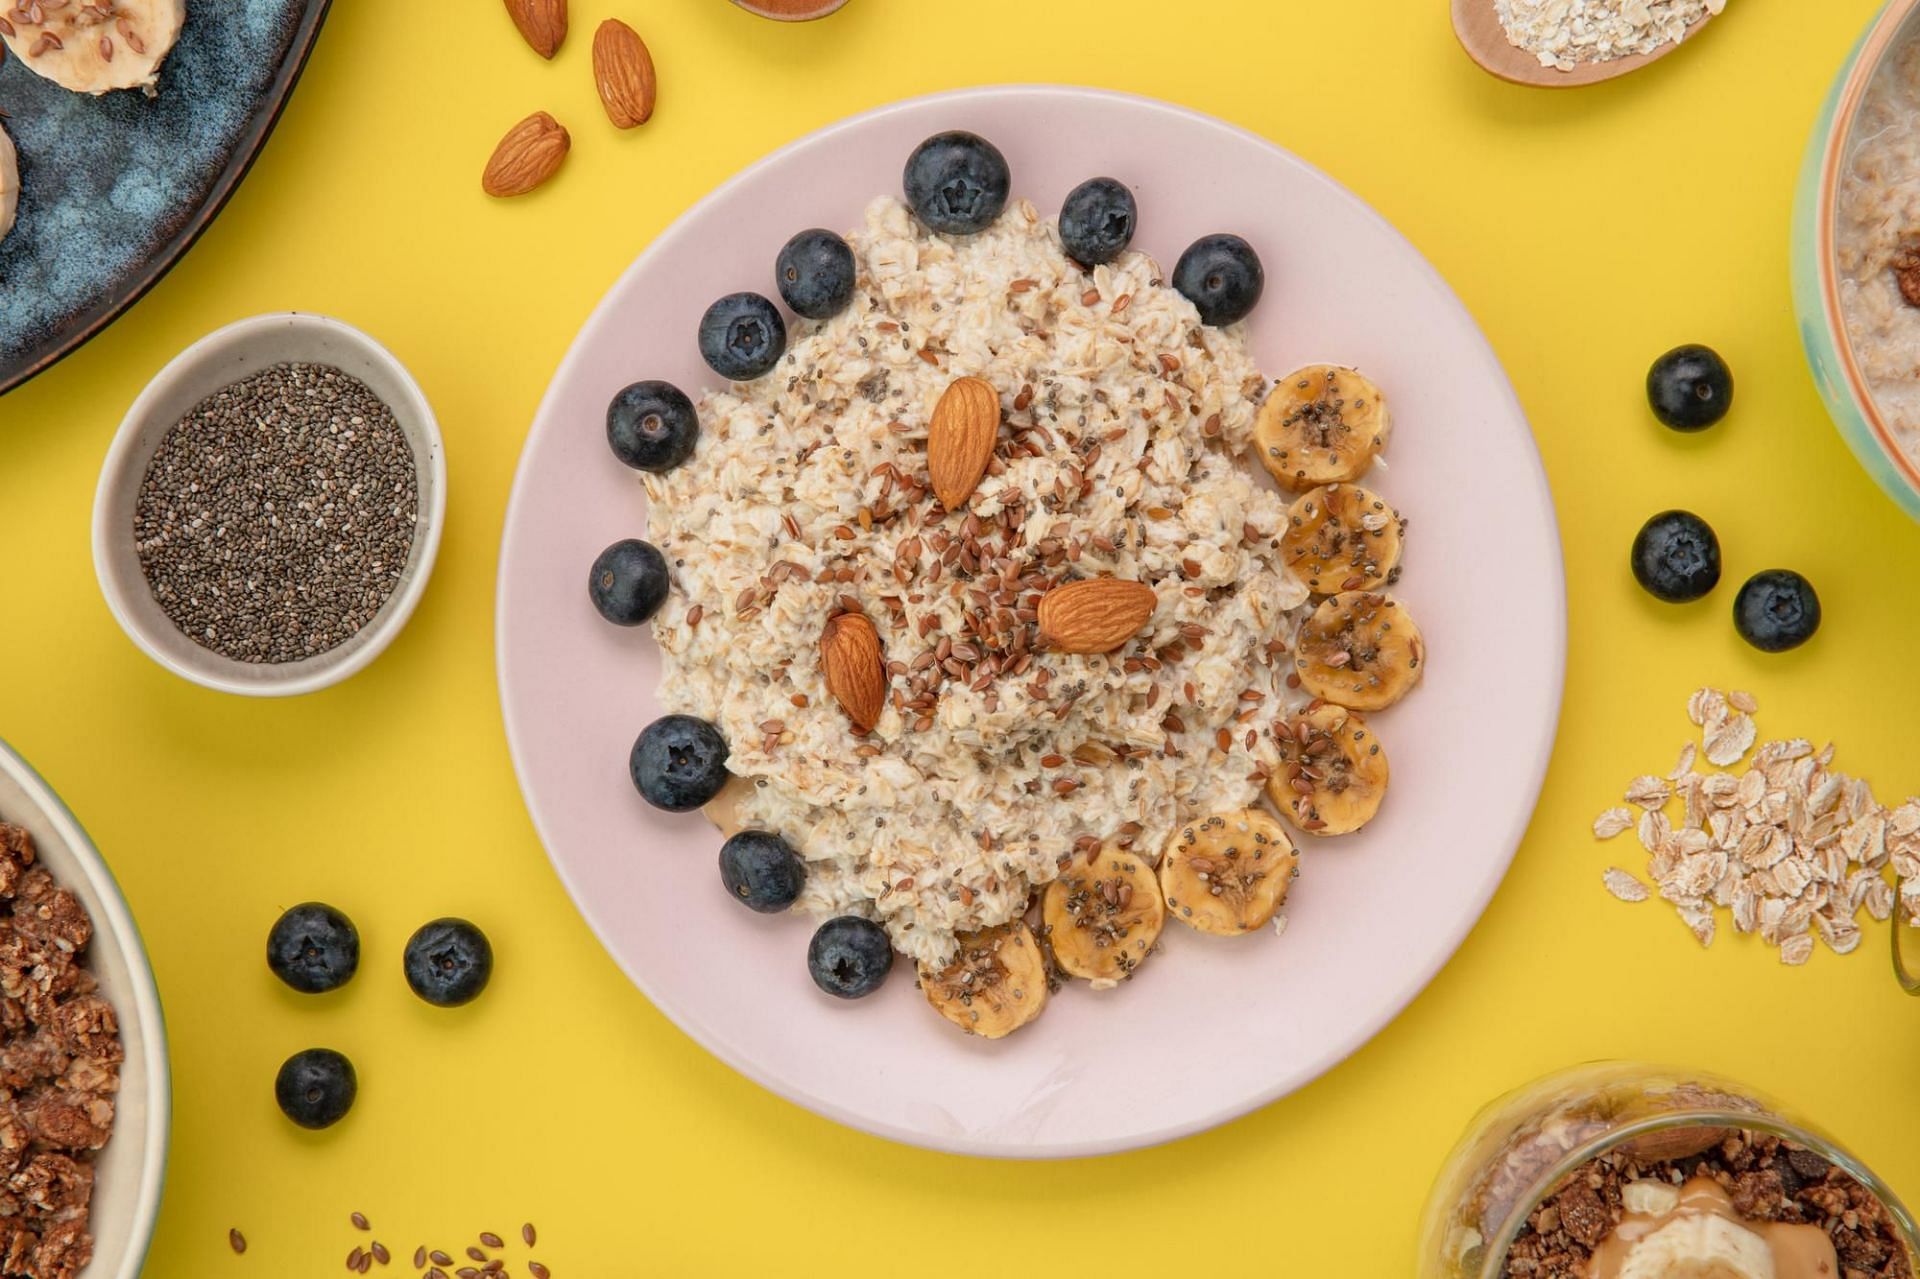 Oatmeal is a popular heart-healthy food (Image by stockking on Freepik)